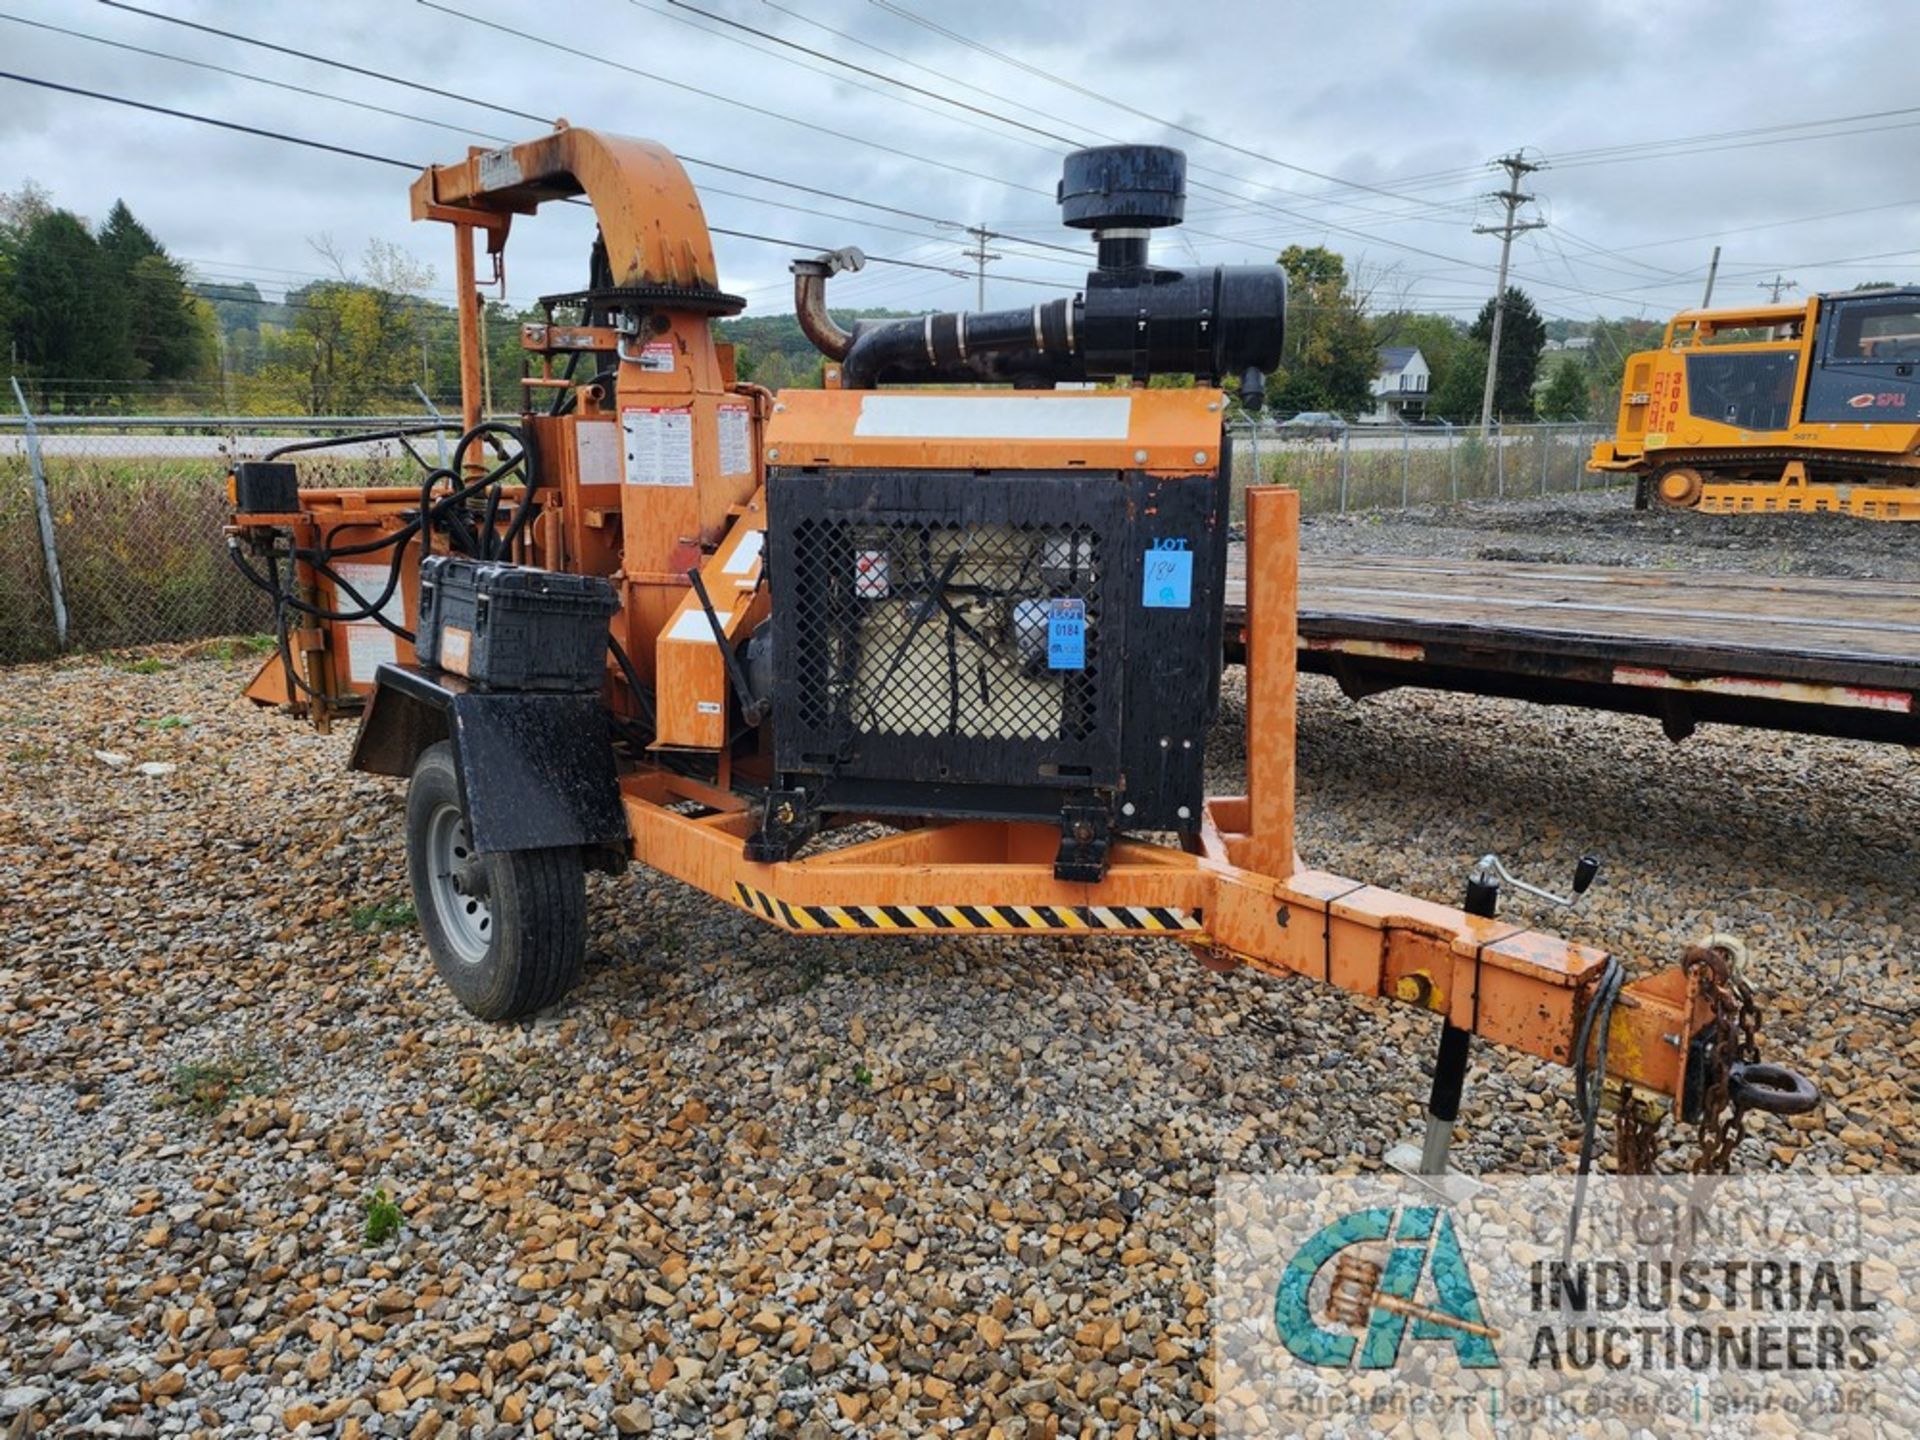 ****1996 BANDIT MODEL 250XP DIESEL CHIPPER; S/N 10008 **LOCATED OFFSITE - CONTACT JOHN ROME FOR